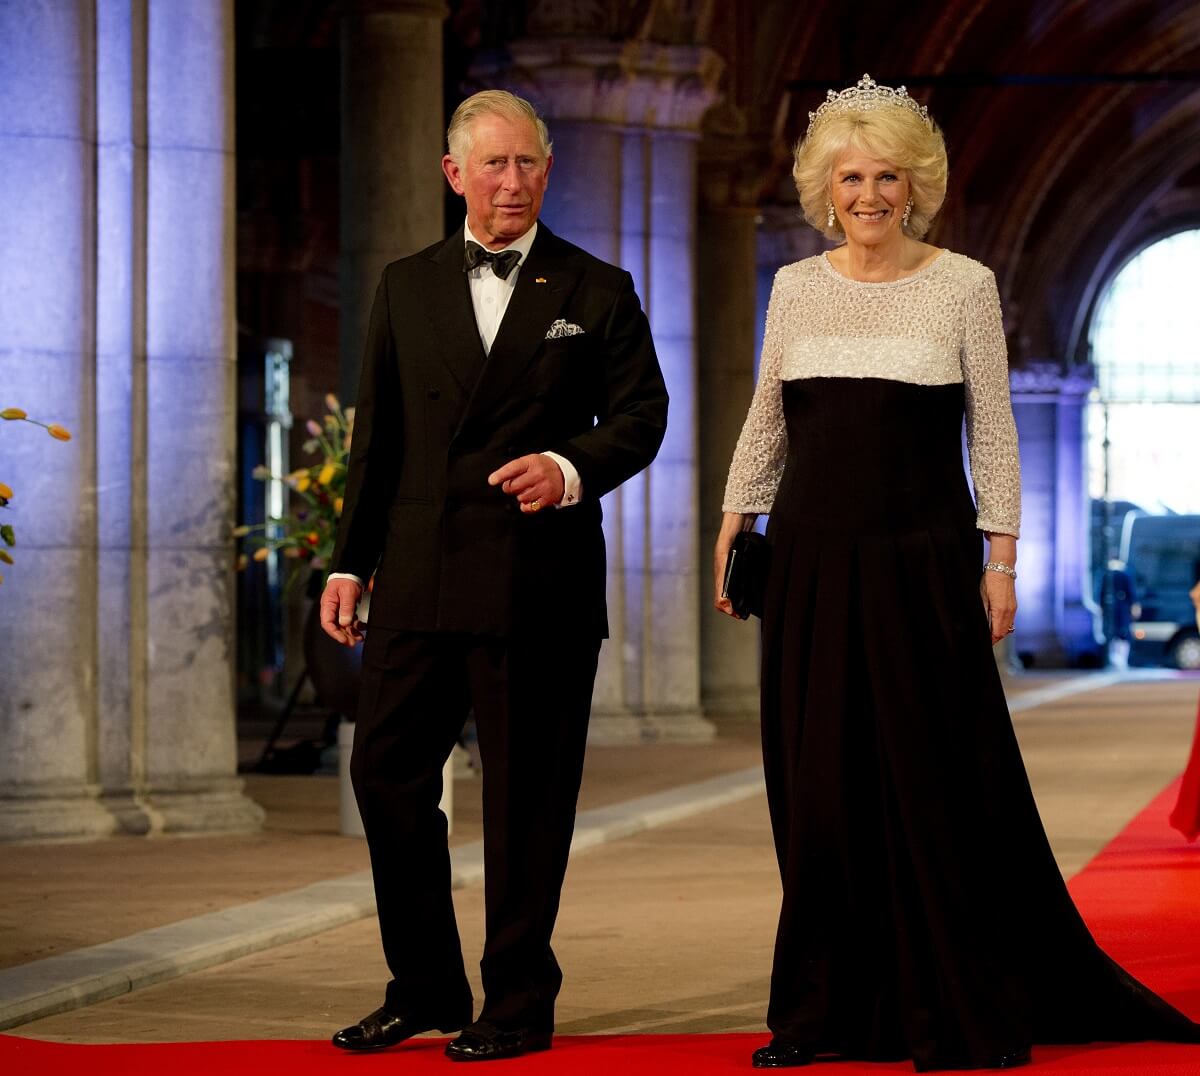 King Charles III and Camilla Parker Bowles (now-Queen Camilla) attend a dinner hosted by Queen Beatrix of The Netherlands